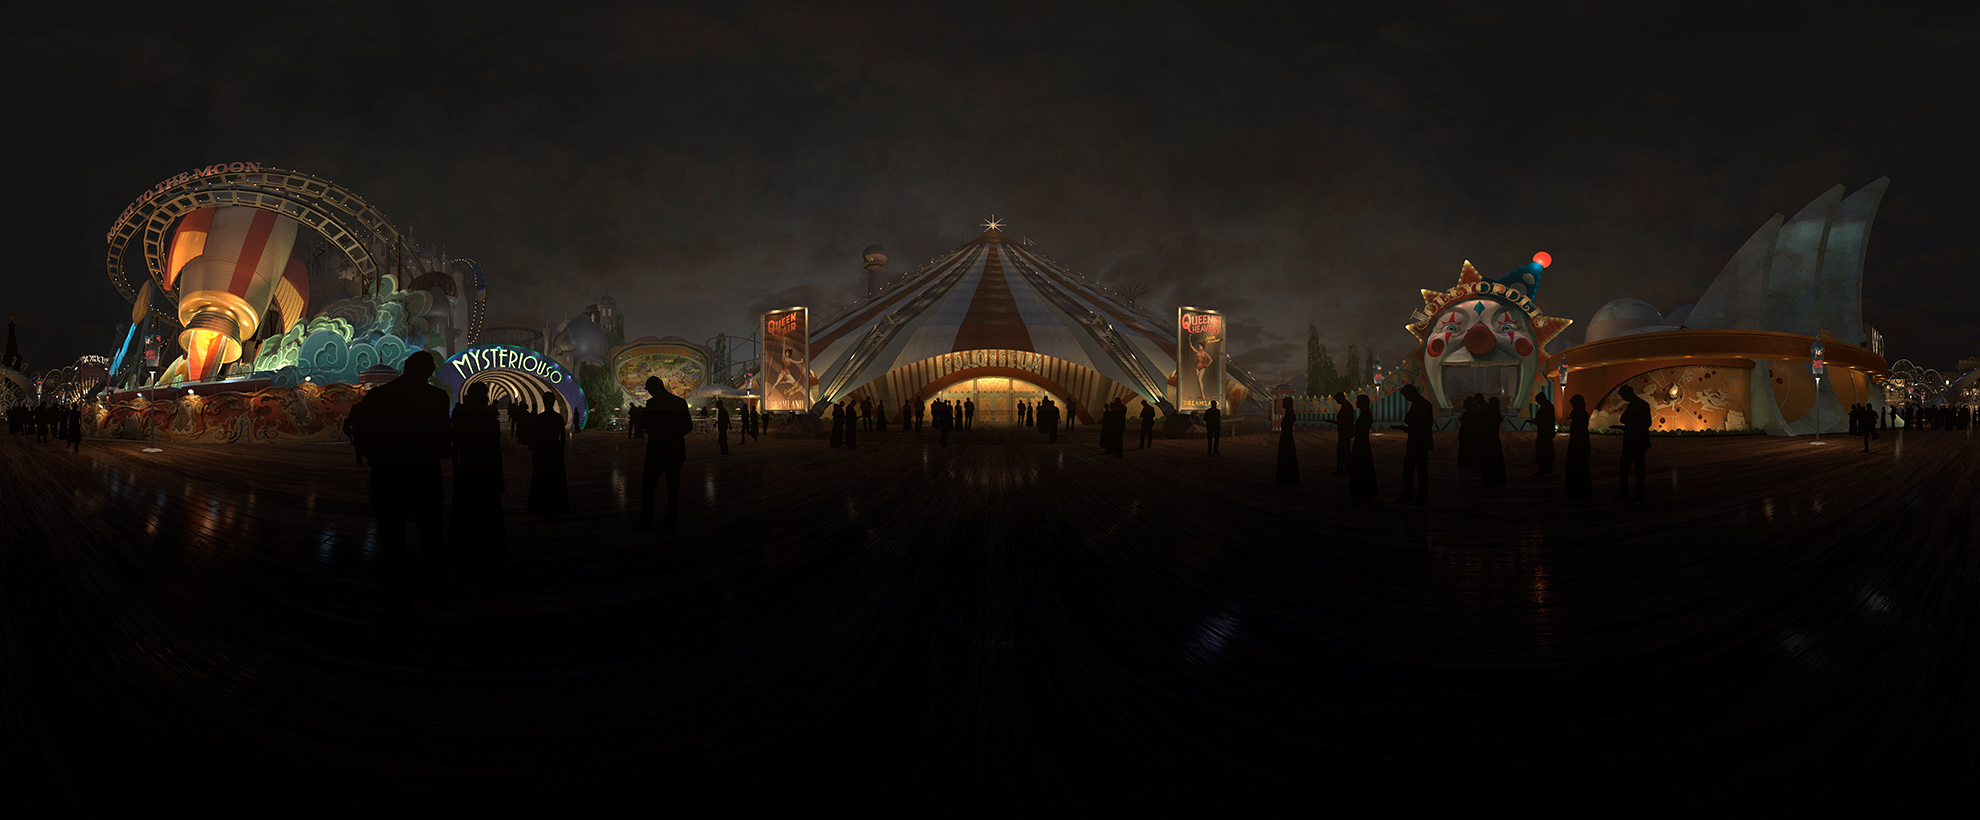 Concept art of the fairground, DreamLand, lit up at night time